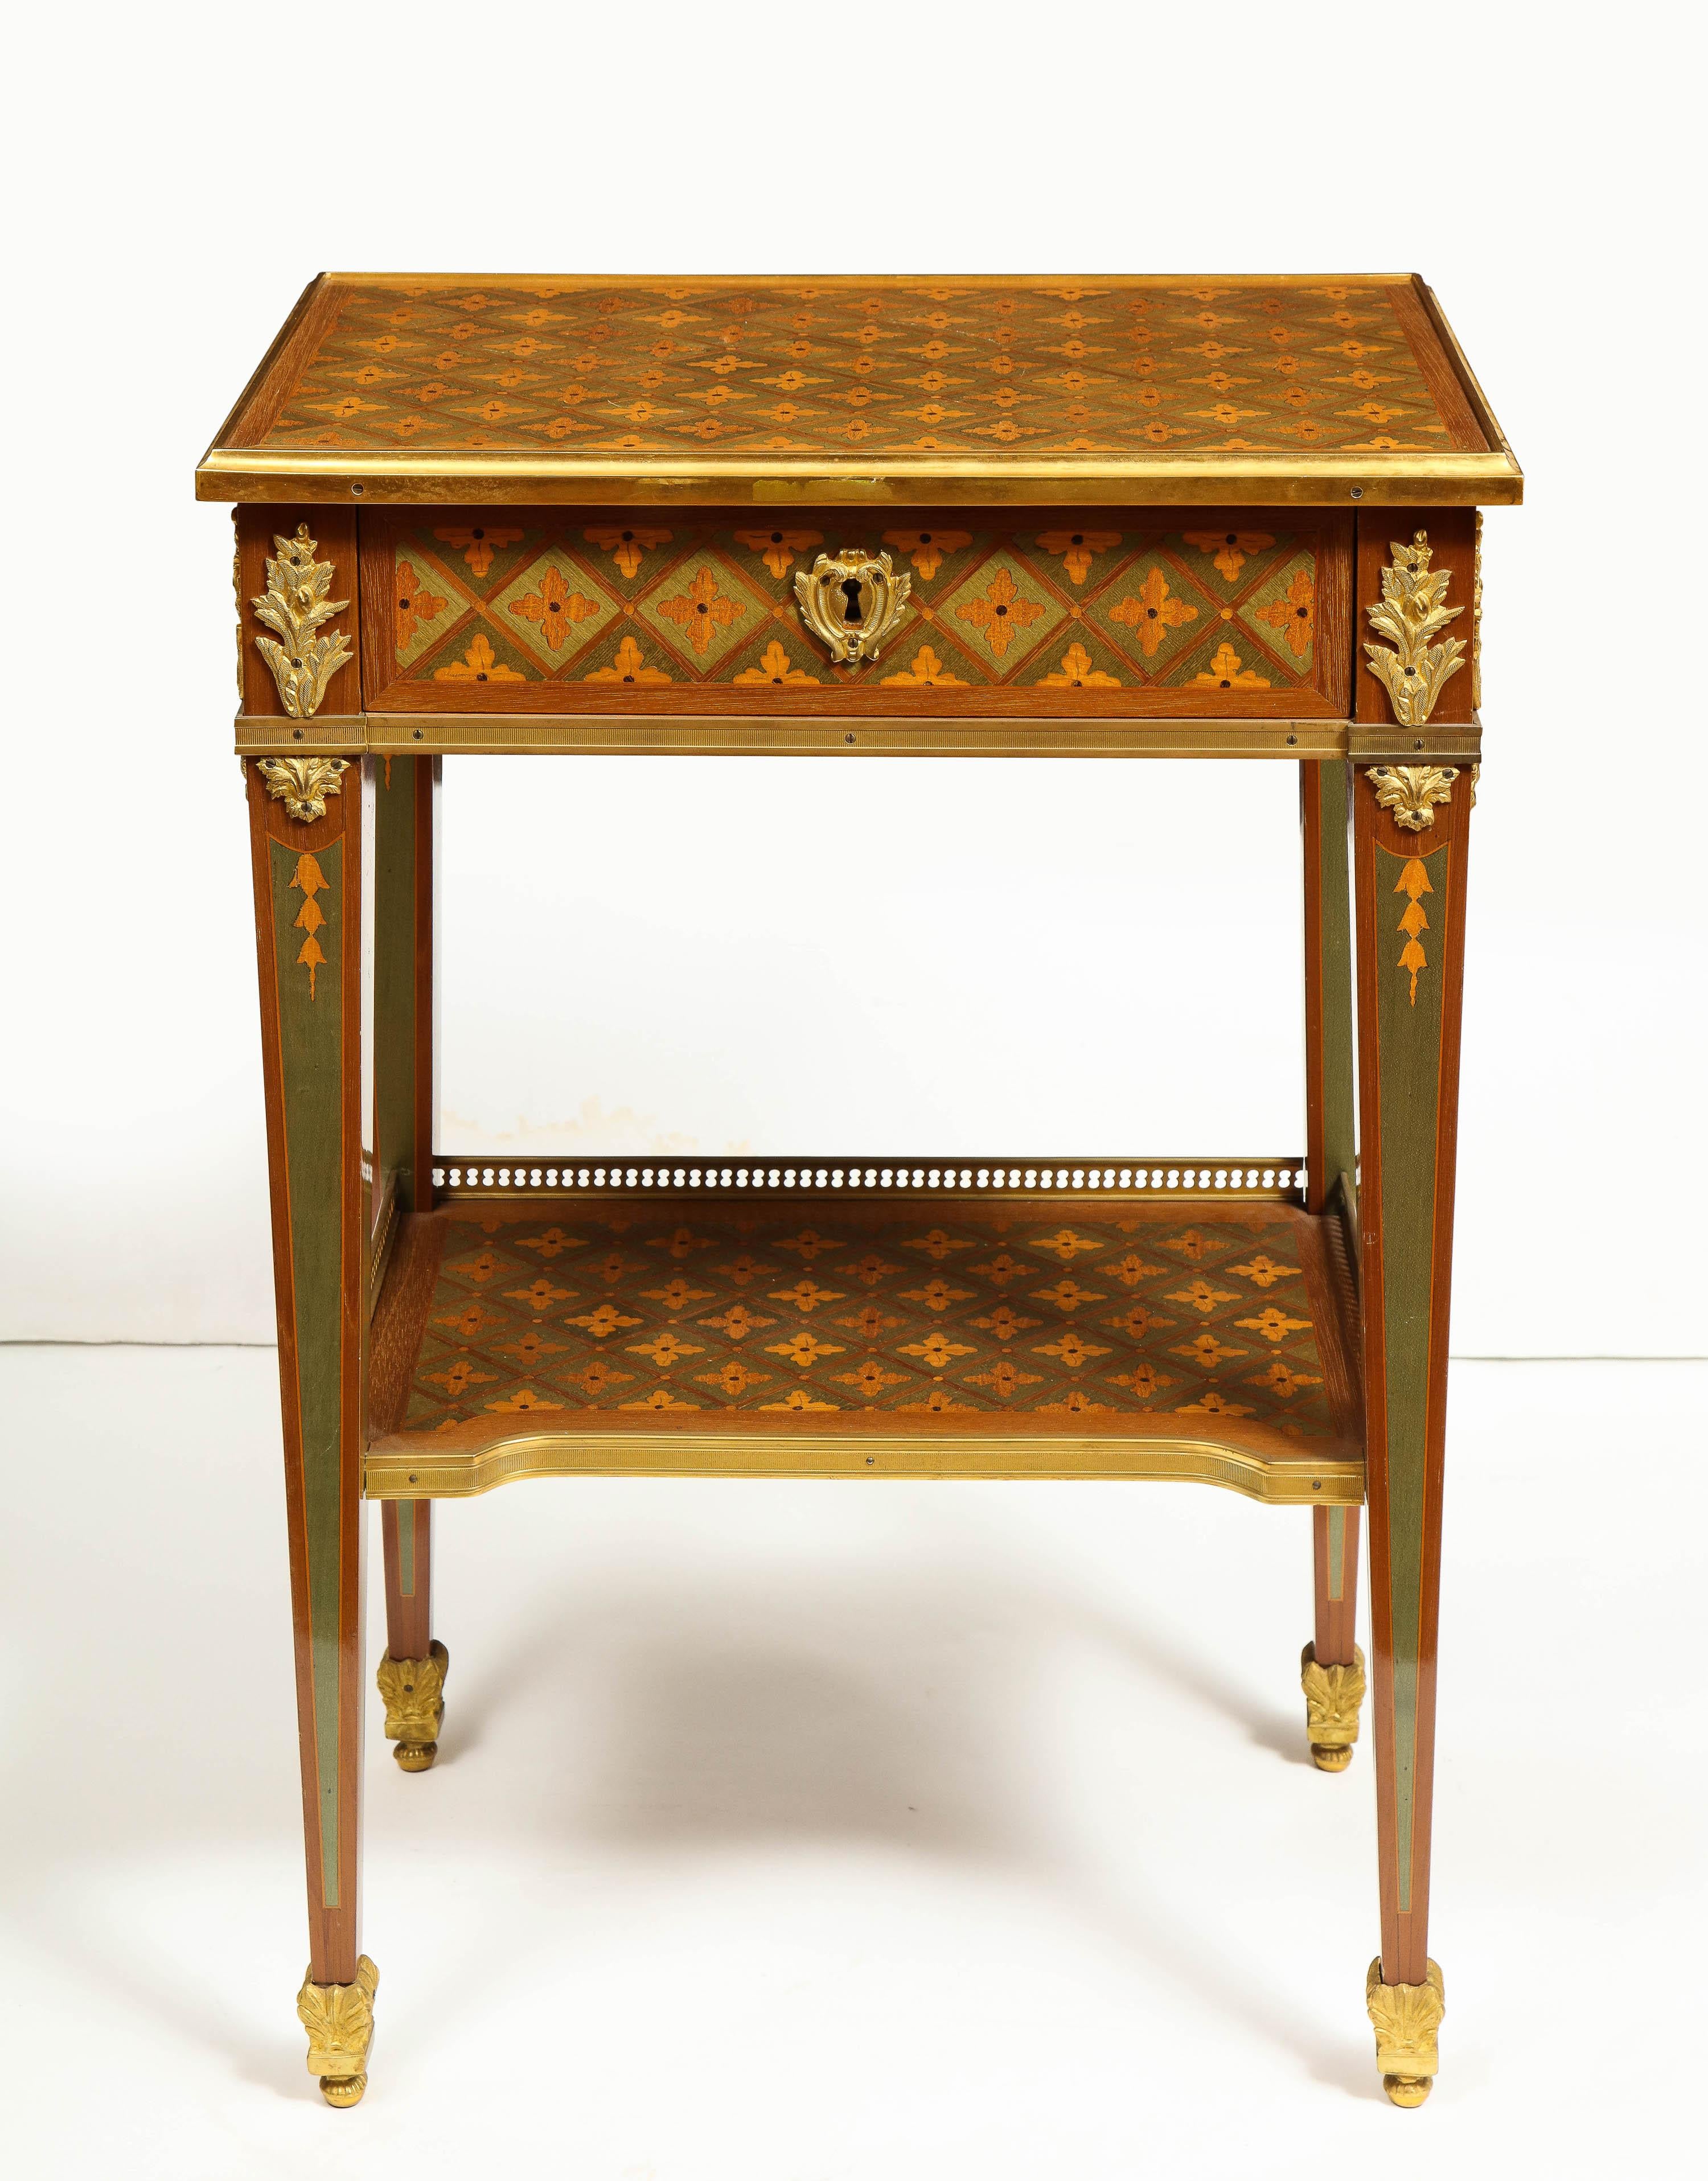 Exceptional Pair of French Ormolu-Mounted Parquetry and Marquetry Side Tables For Sale 9